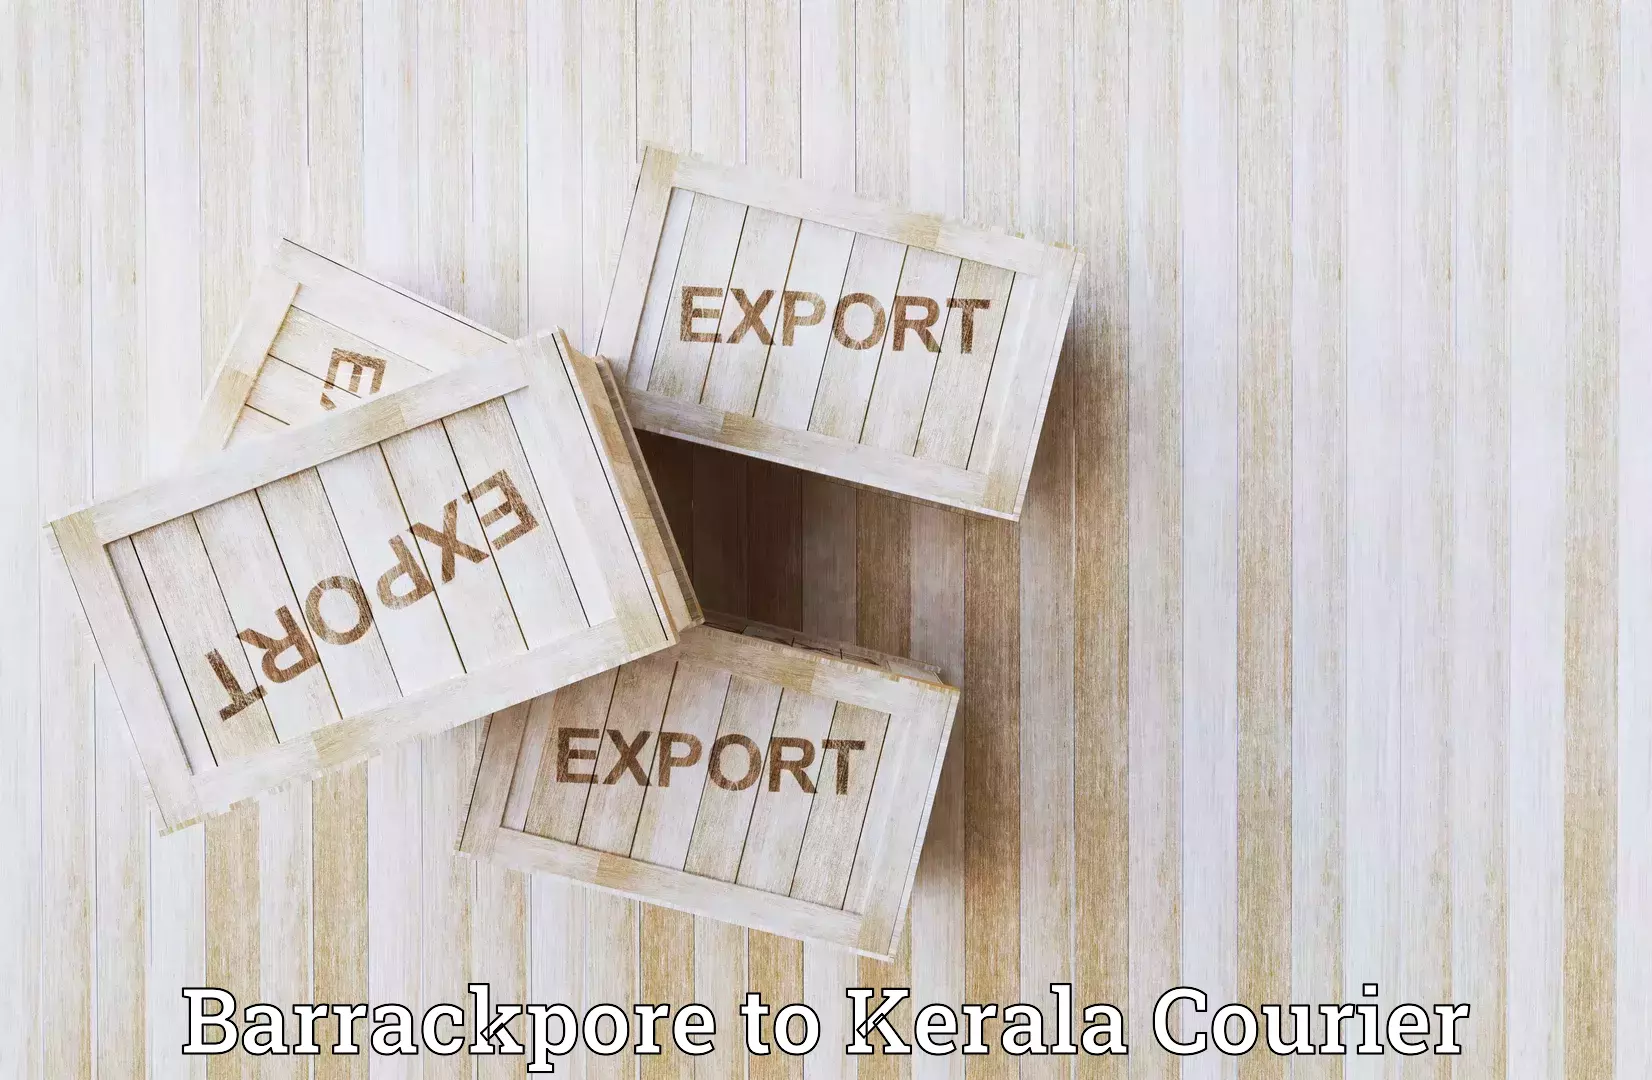 End-to-end delivery Barrackpore to Kerala